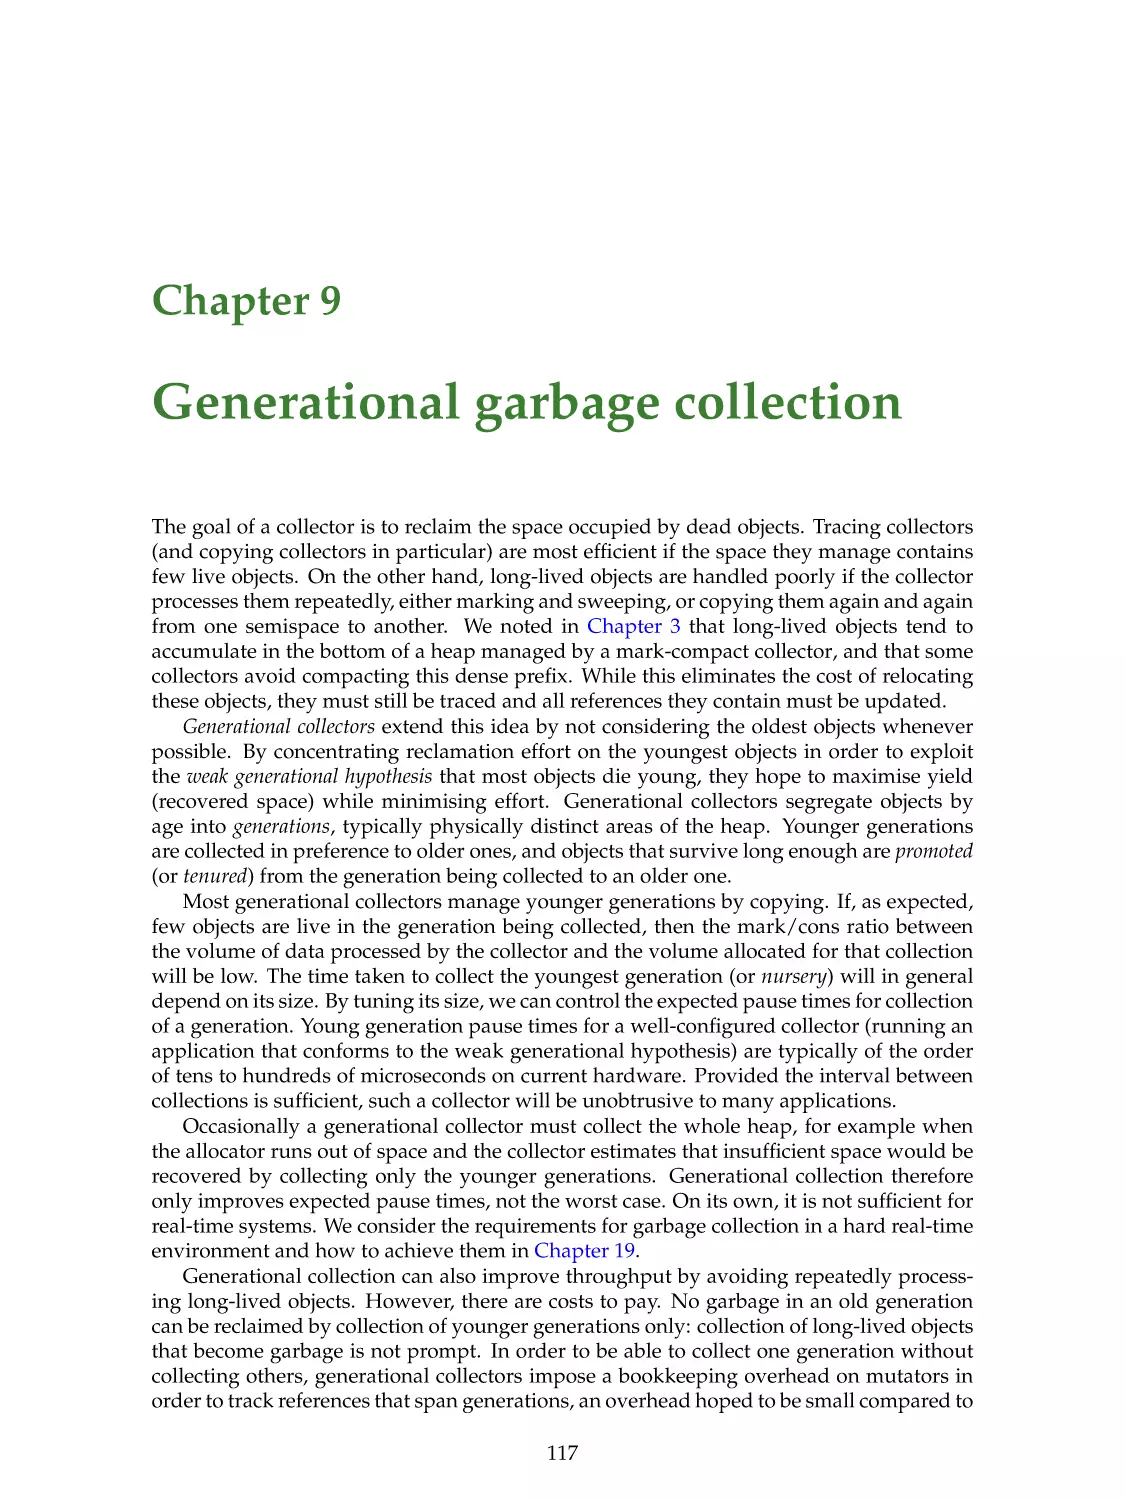 9. Generational garbage collection